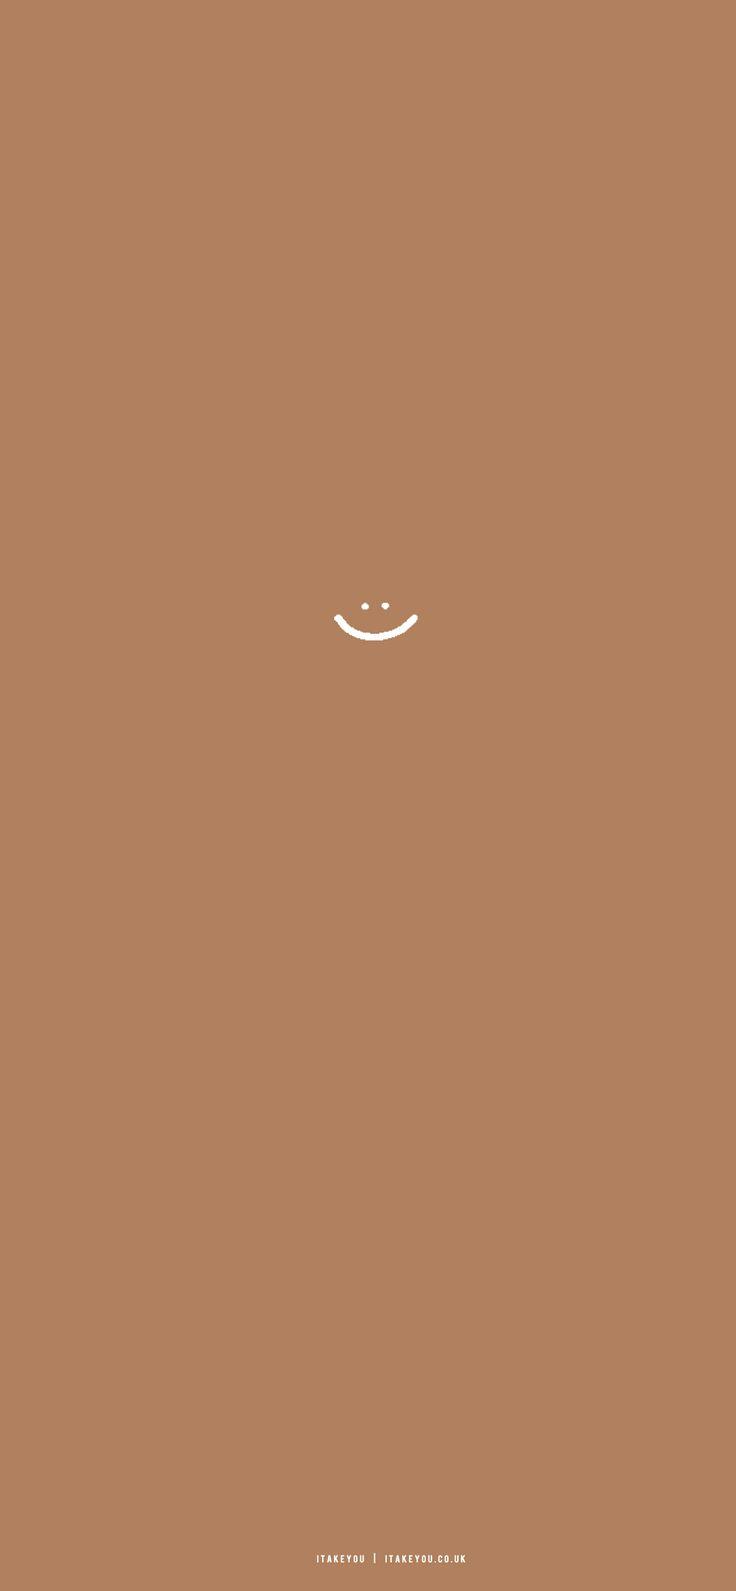 20 Minimalist Brown Wallpaper iPhone Ideas for iPhone Smile